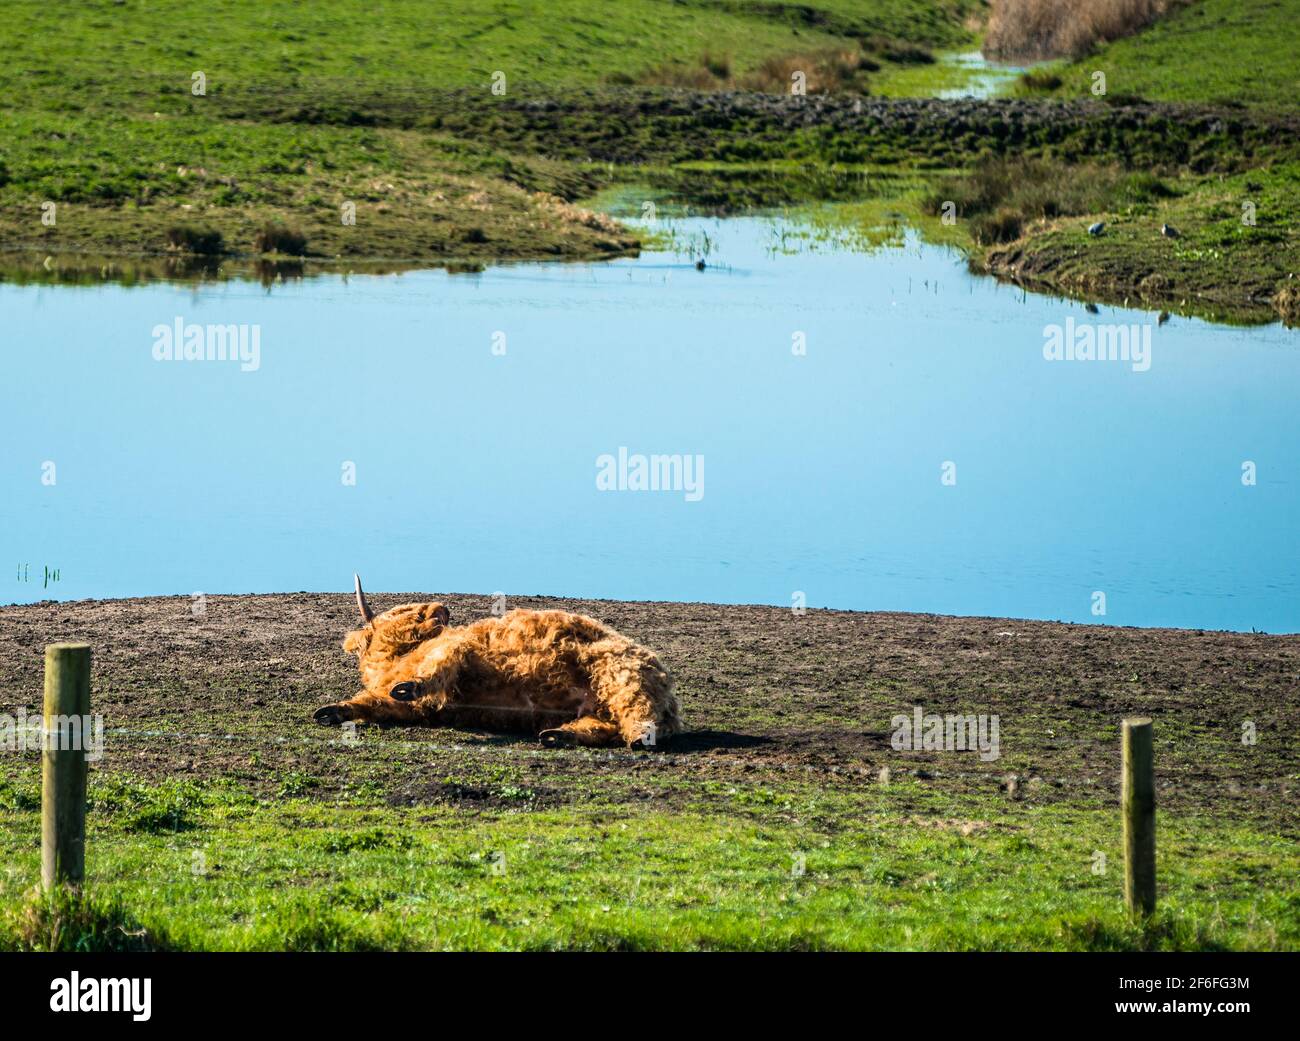 Highland cattle grazing on Wicken Fen Nature Reserve in Cambridgeshire, East Anglia, England, UK. Stock Photo